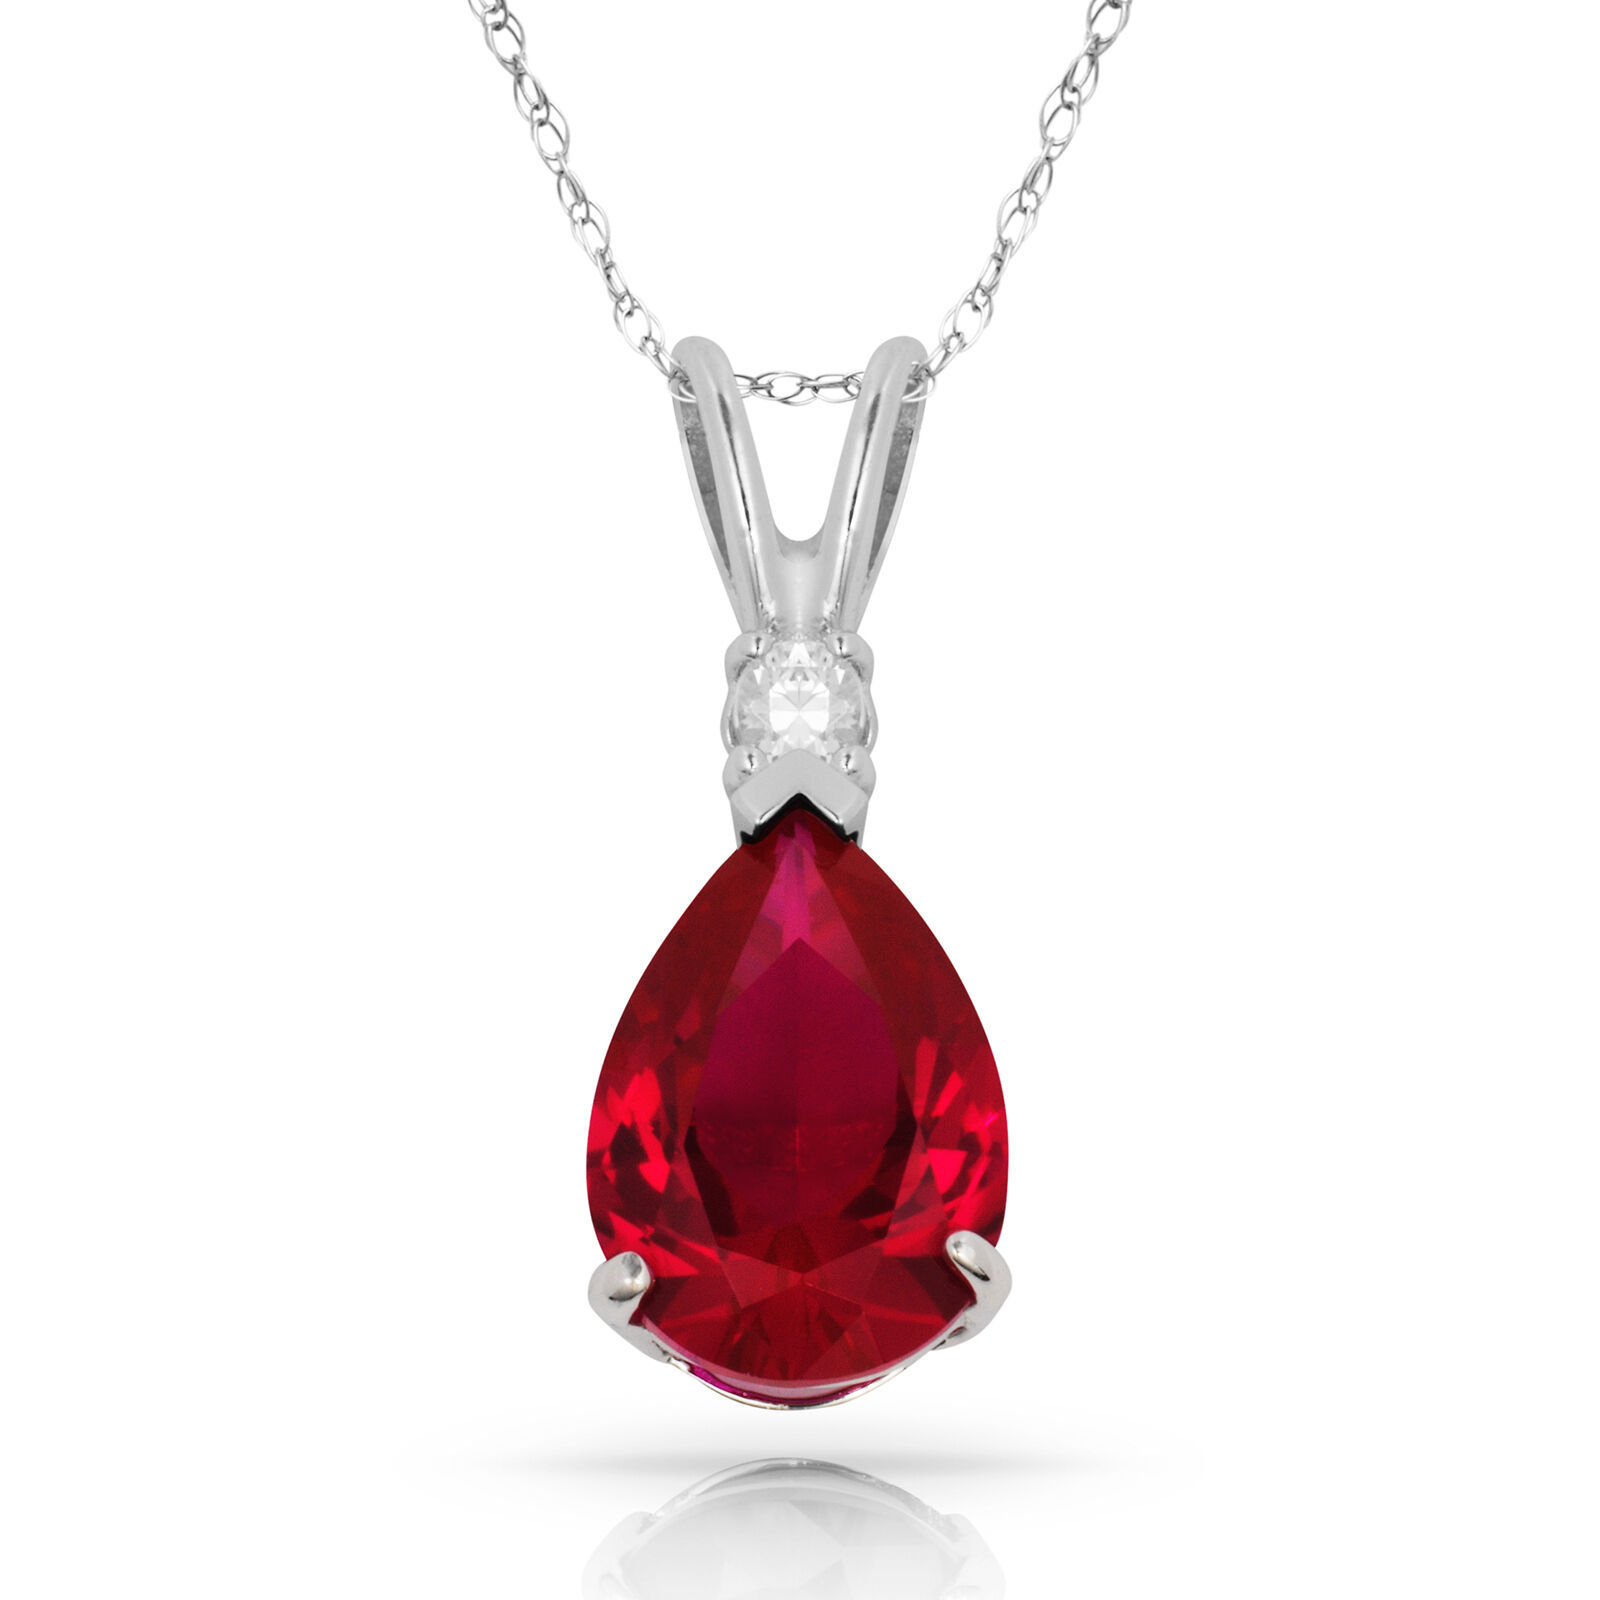 Primary image for 3.05 CT Red Ruby Pear Shape 2 Stone Gemstone Pendant & Necklace 14K W Gold